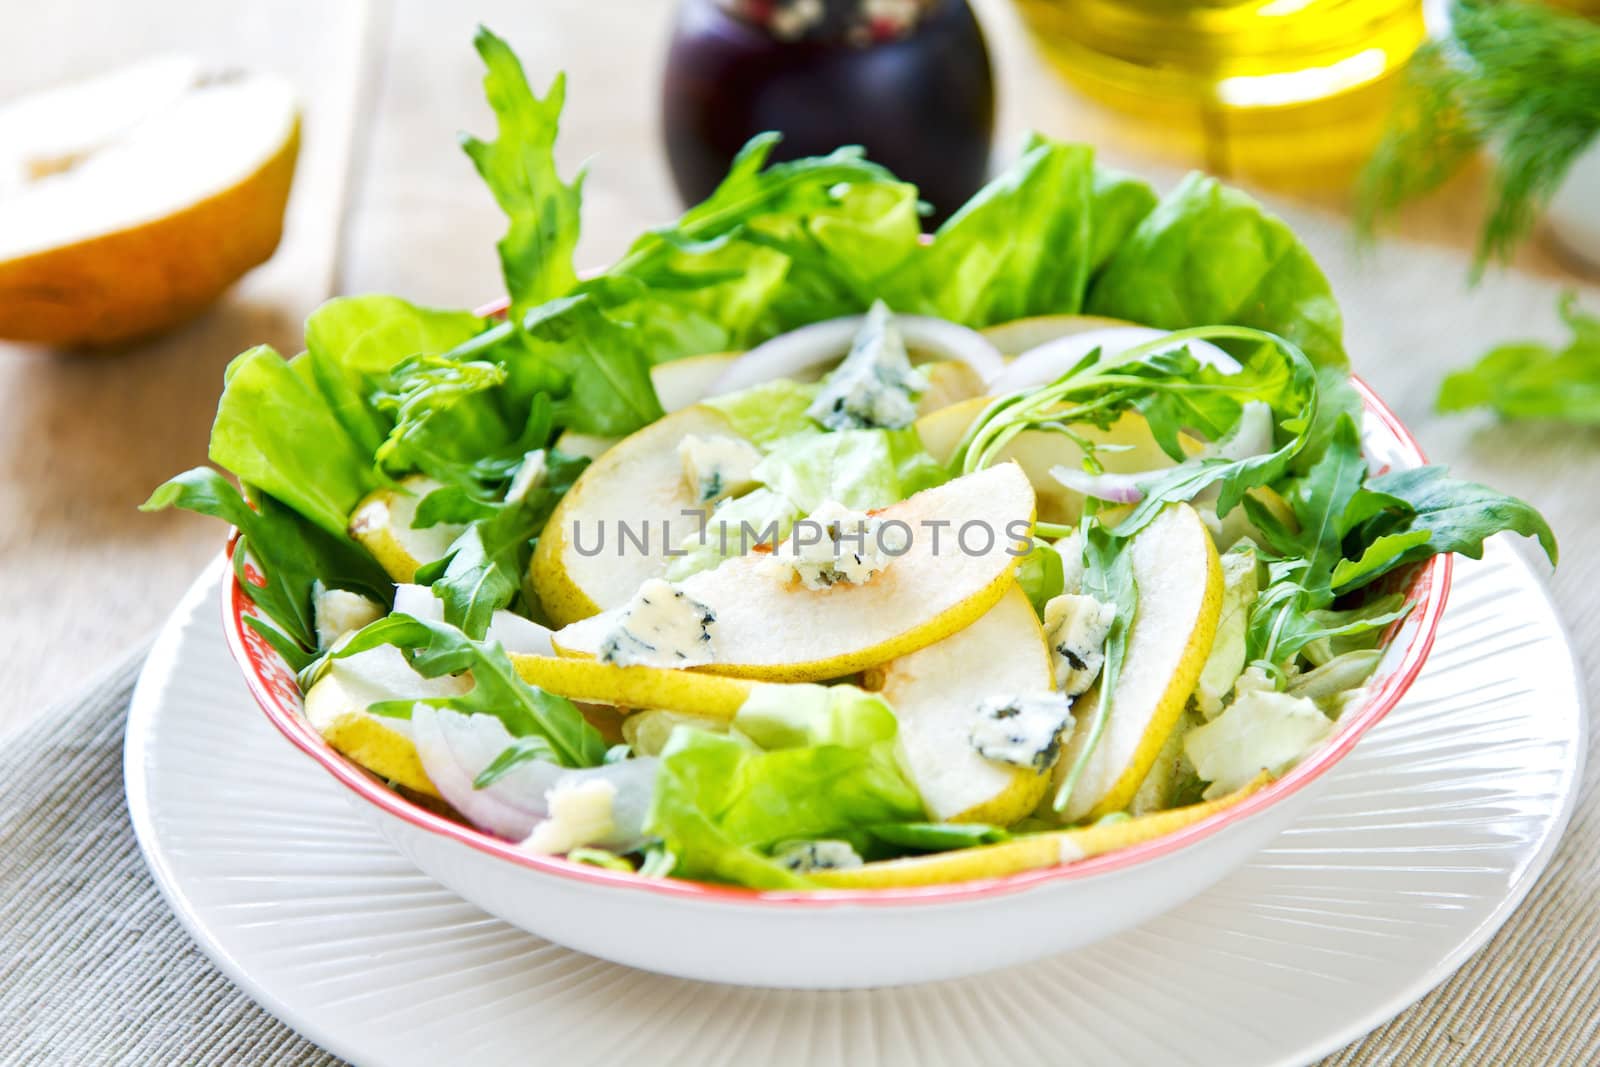 Pear with Blue cheese and Rocket salad by vanillaechoes